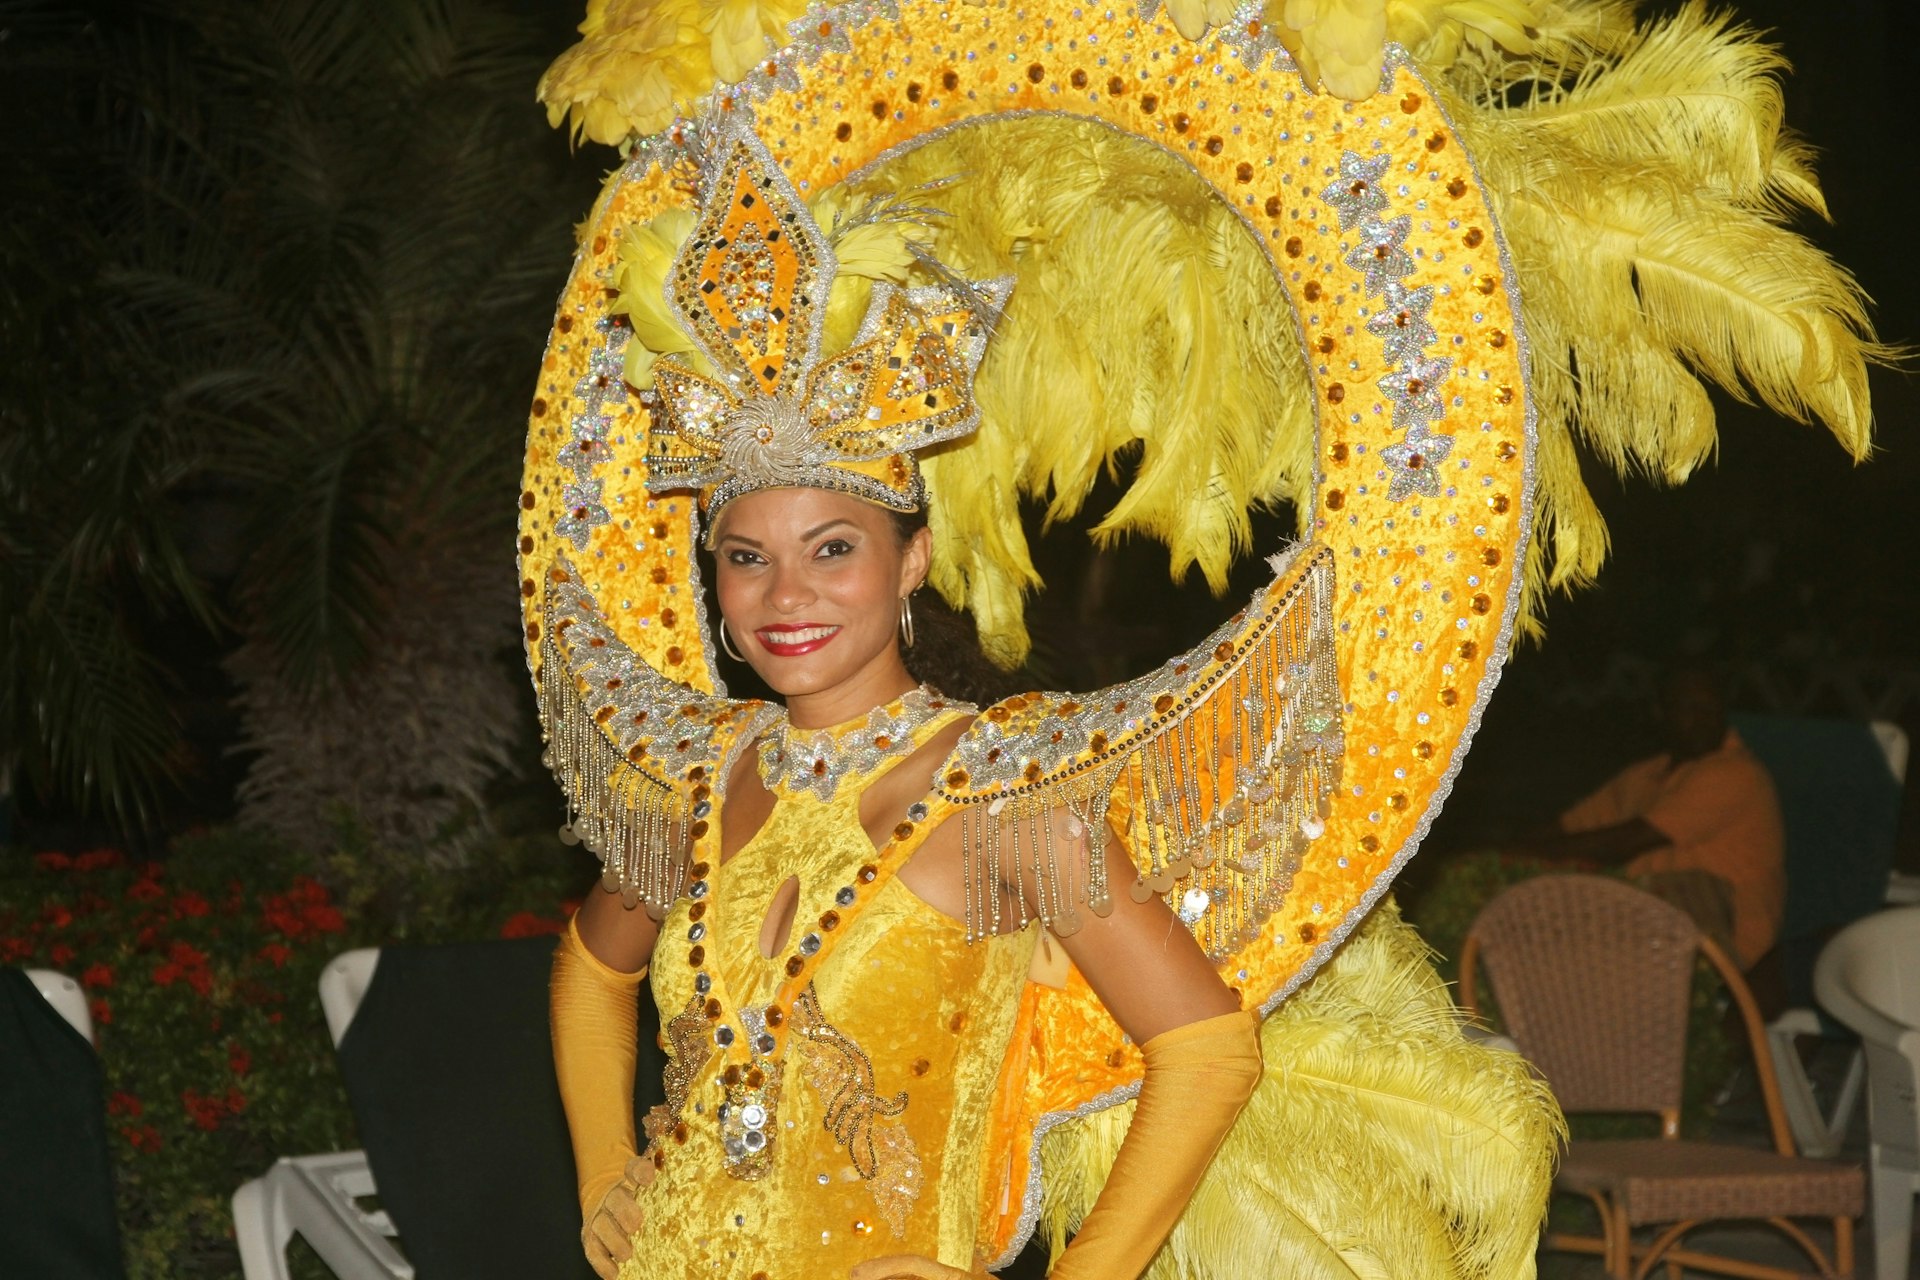 A woman wears a golden sparkling costume with a large head piece as she performs a traditional Aruban dance.